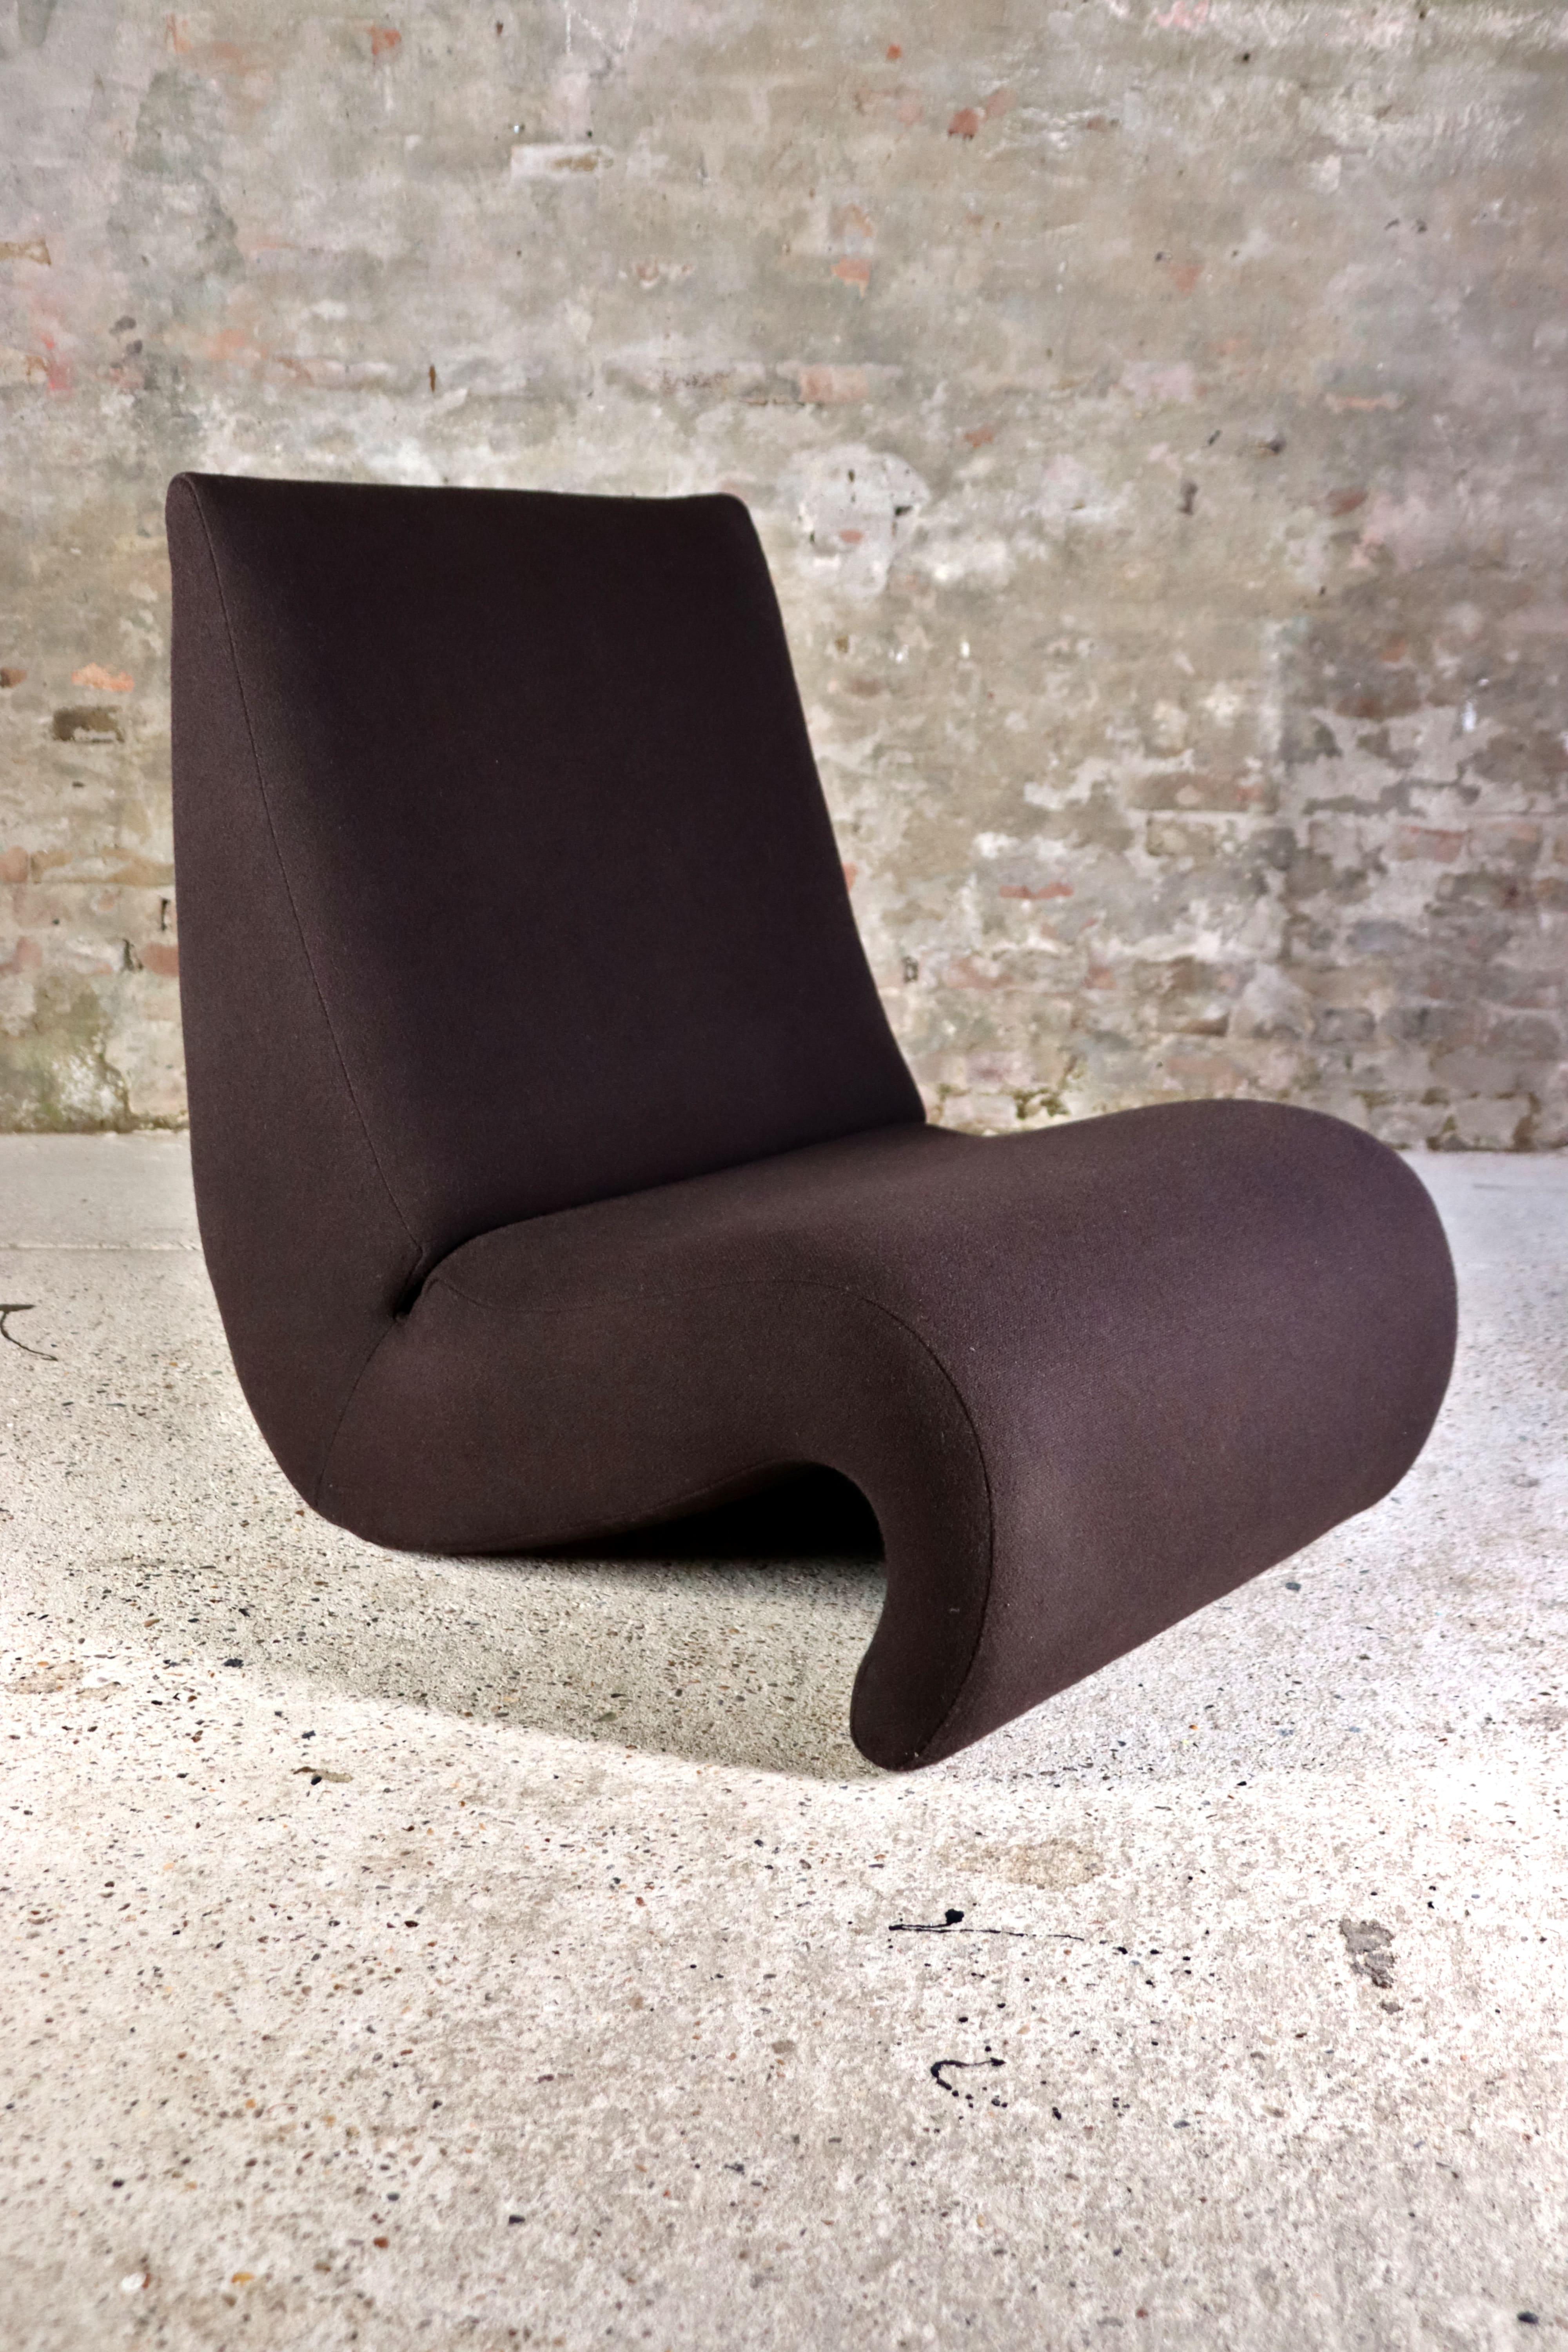 This chair is called Amoebe and is designed by Verner Panton for Vitra. It is inspired by the protozoa and this is reflected in the seat and backrest: in a single, flowing shape, it ergonomically embraces the body. This cheerful lounge chair